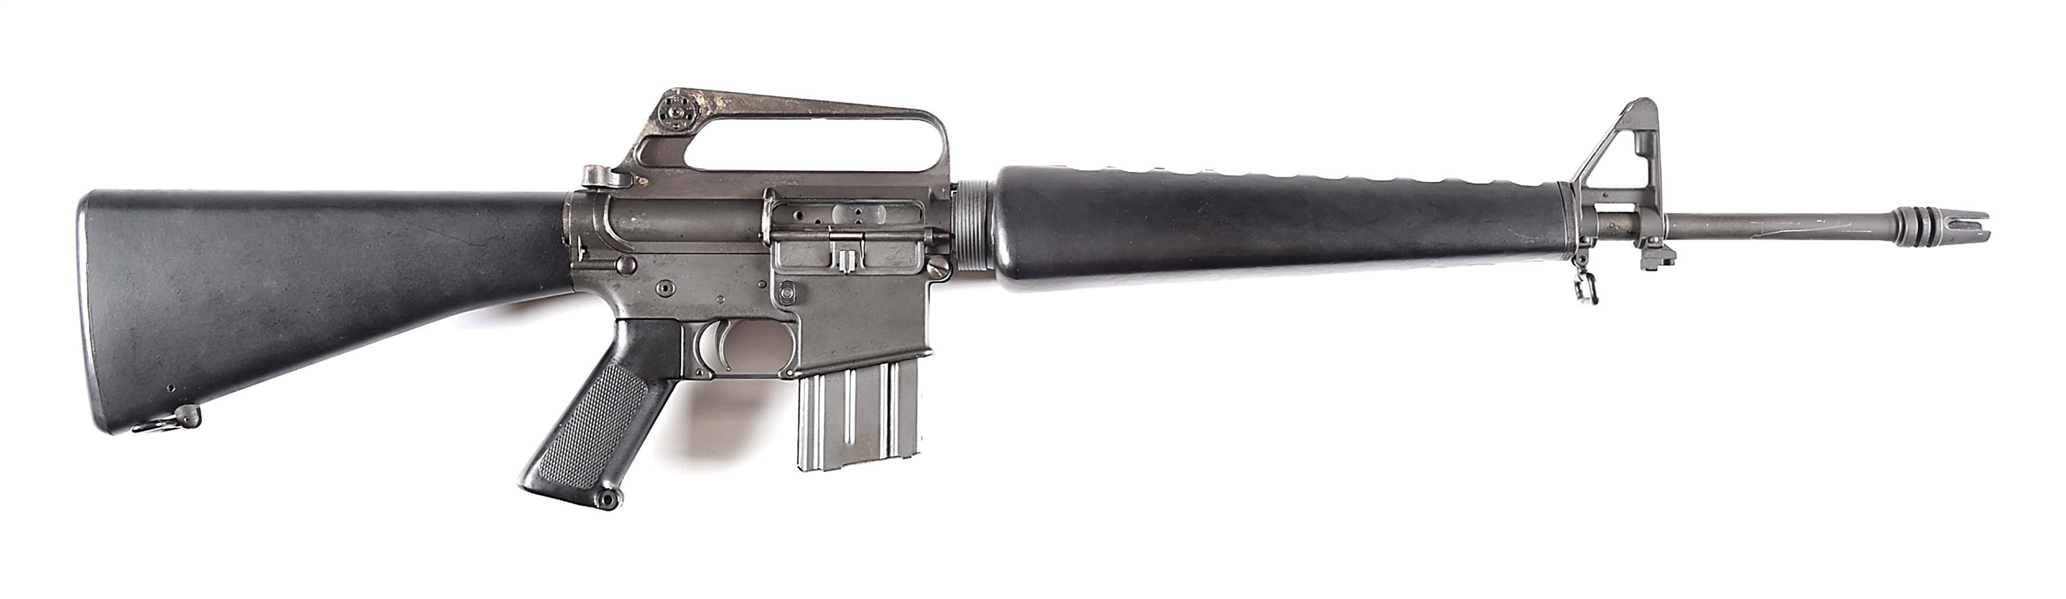 (C) EARLY PRODUCTION 1964 COLT SP1 AR-15 SEMI AUTOMATIC RIFLE WITH PERIOD ACCESSORIES.